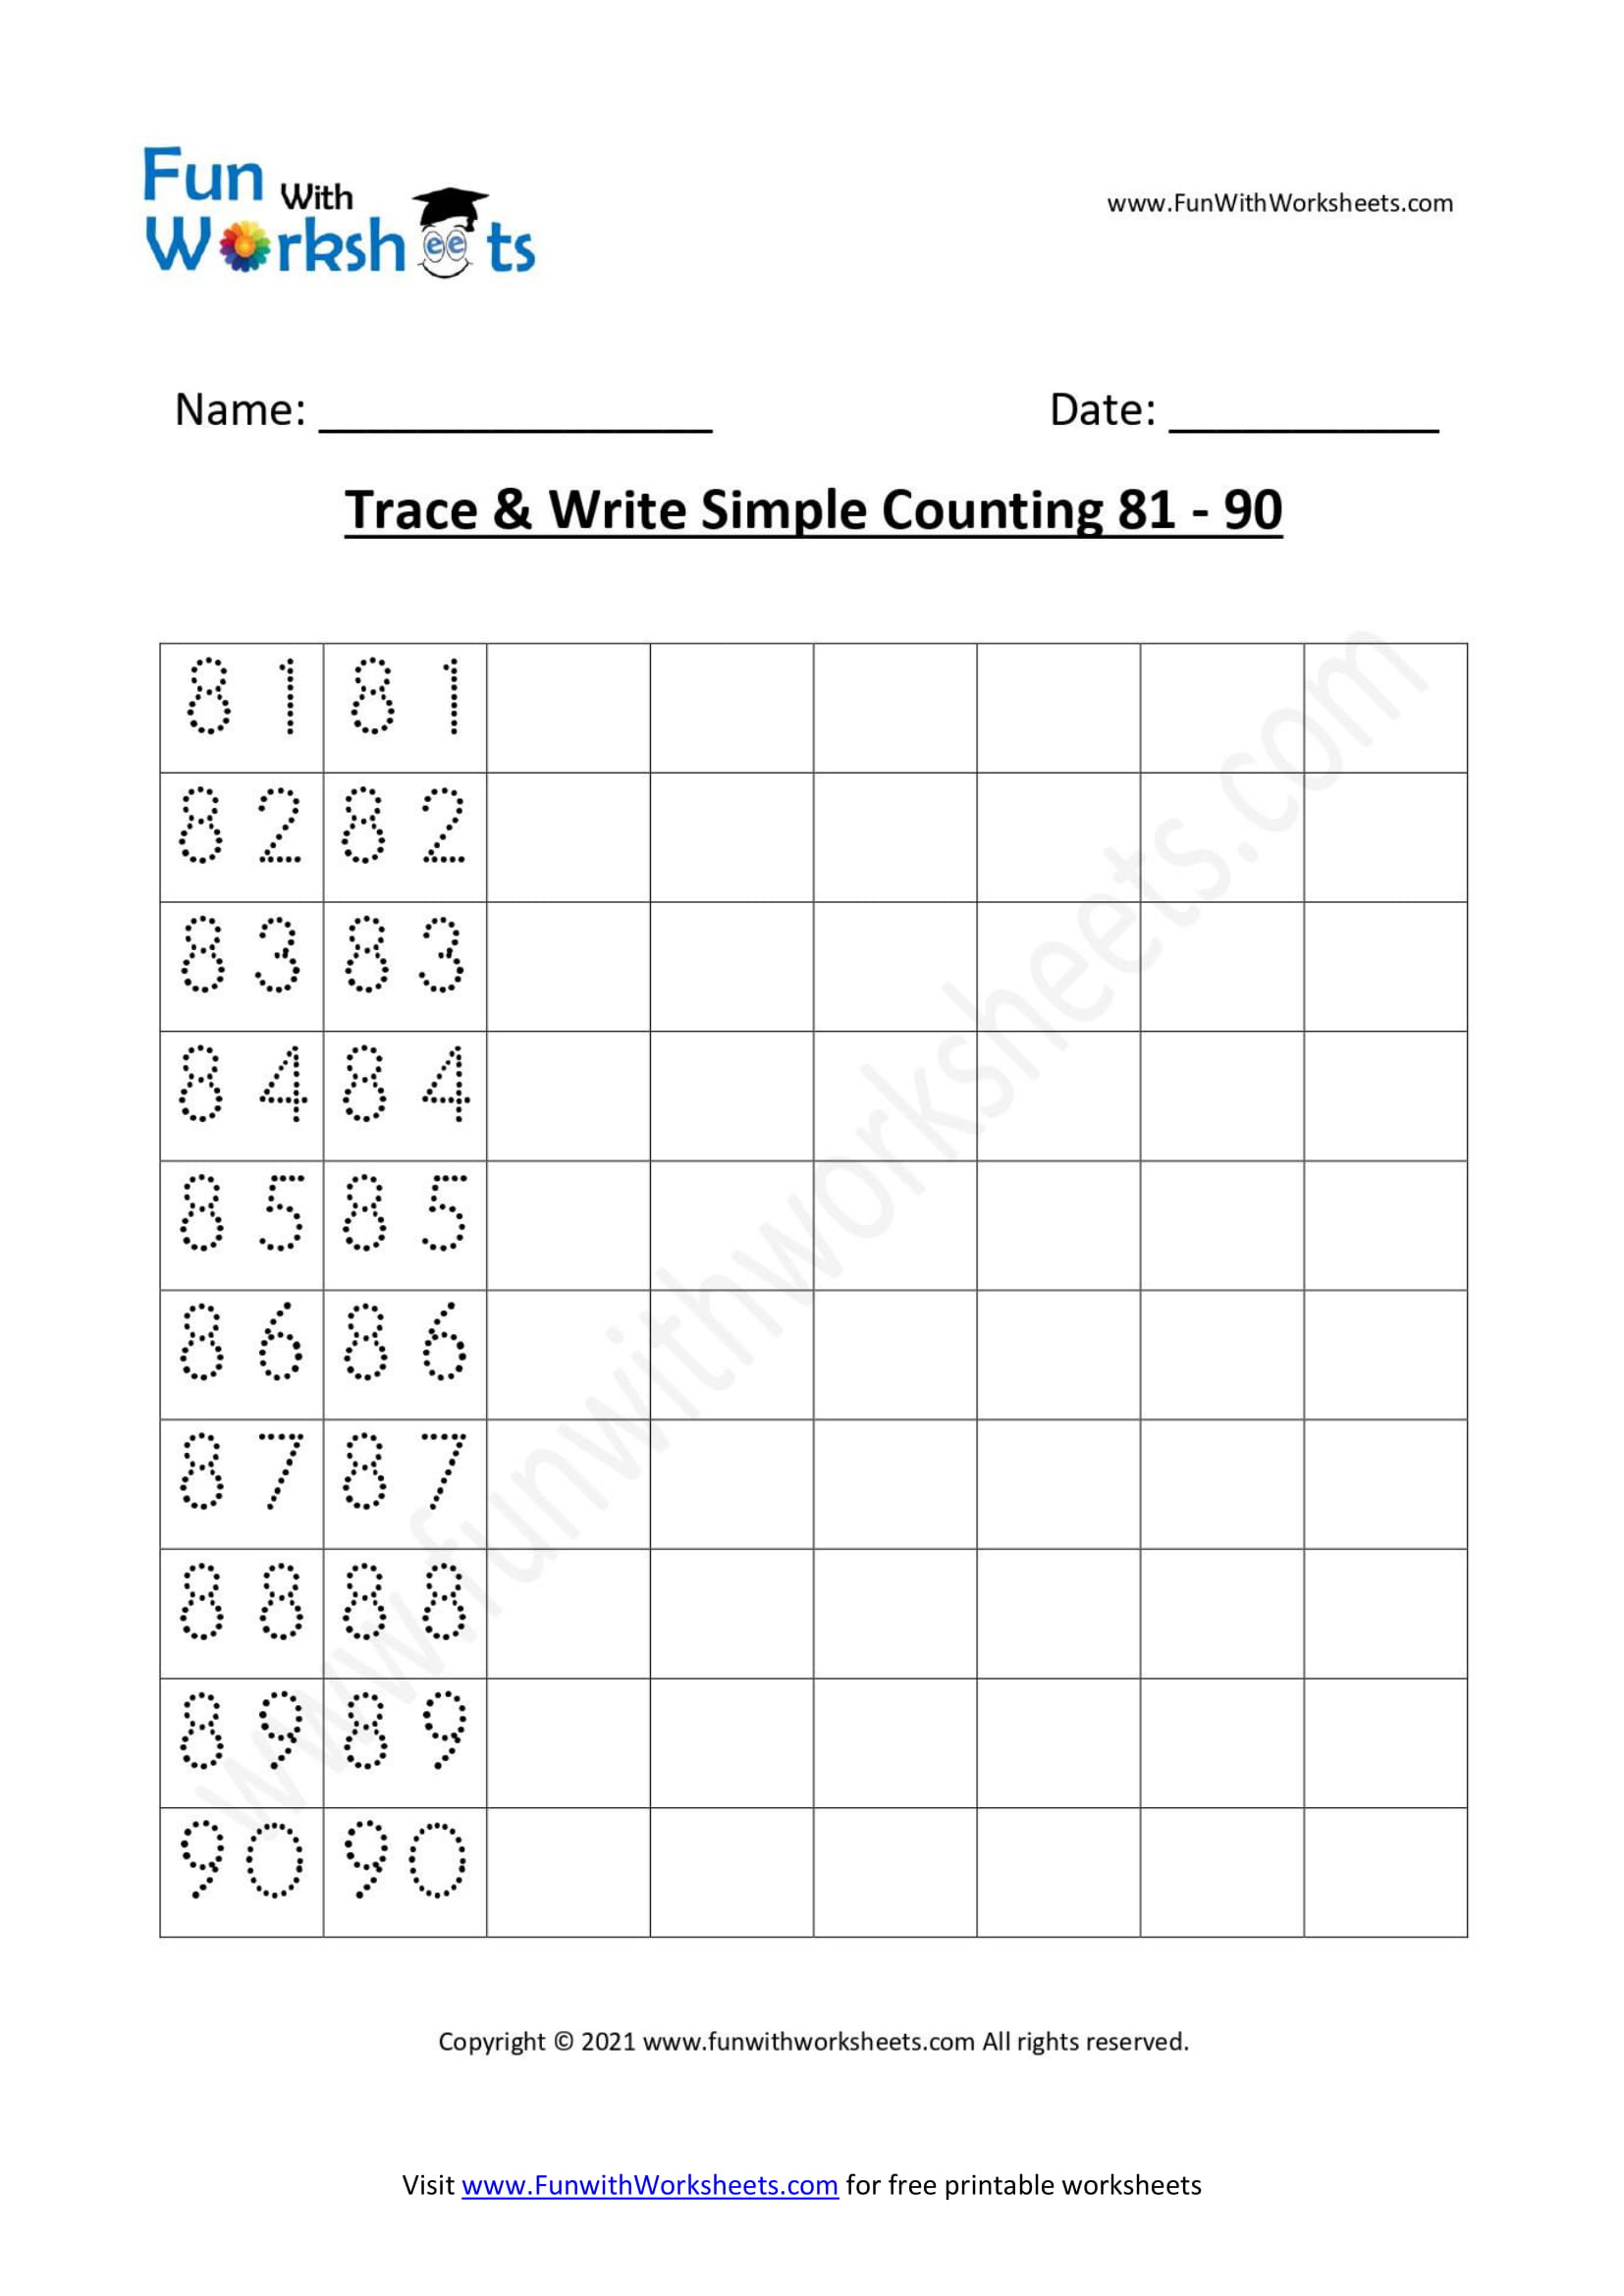 trace-and-learn-simple-counting-81-90-funwithworksheets